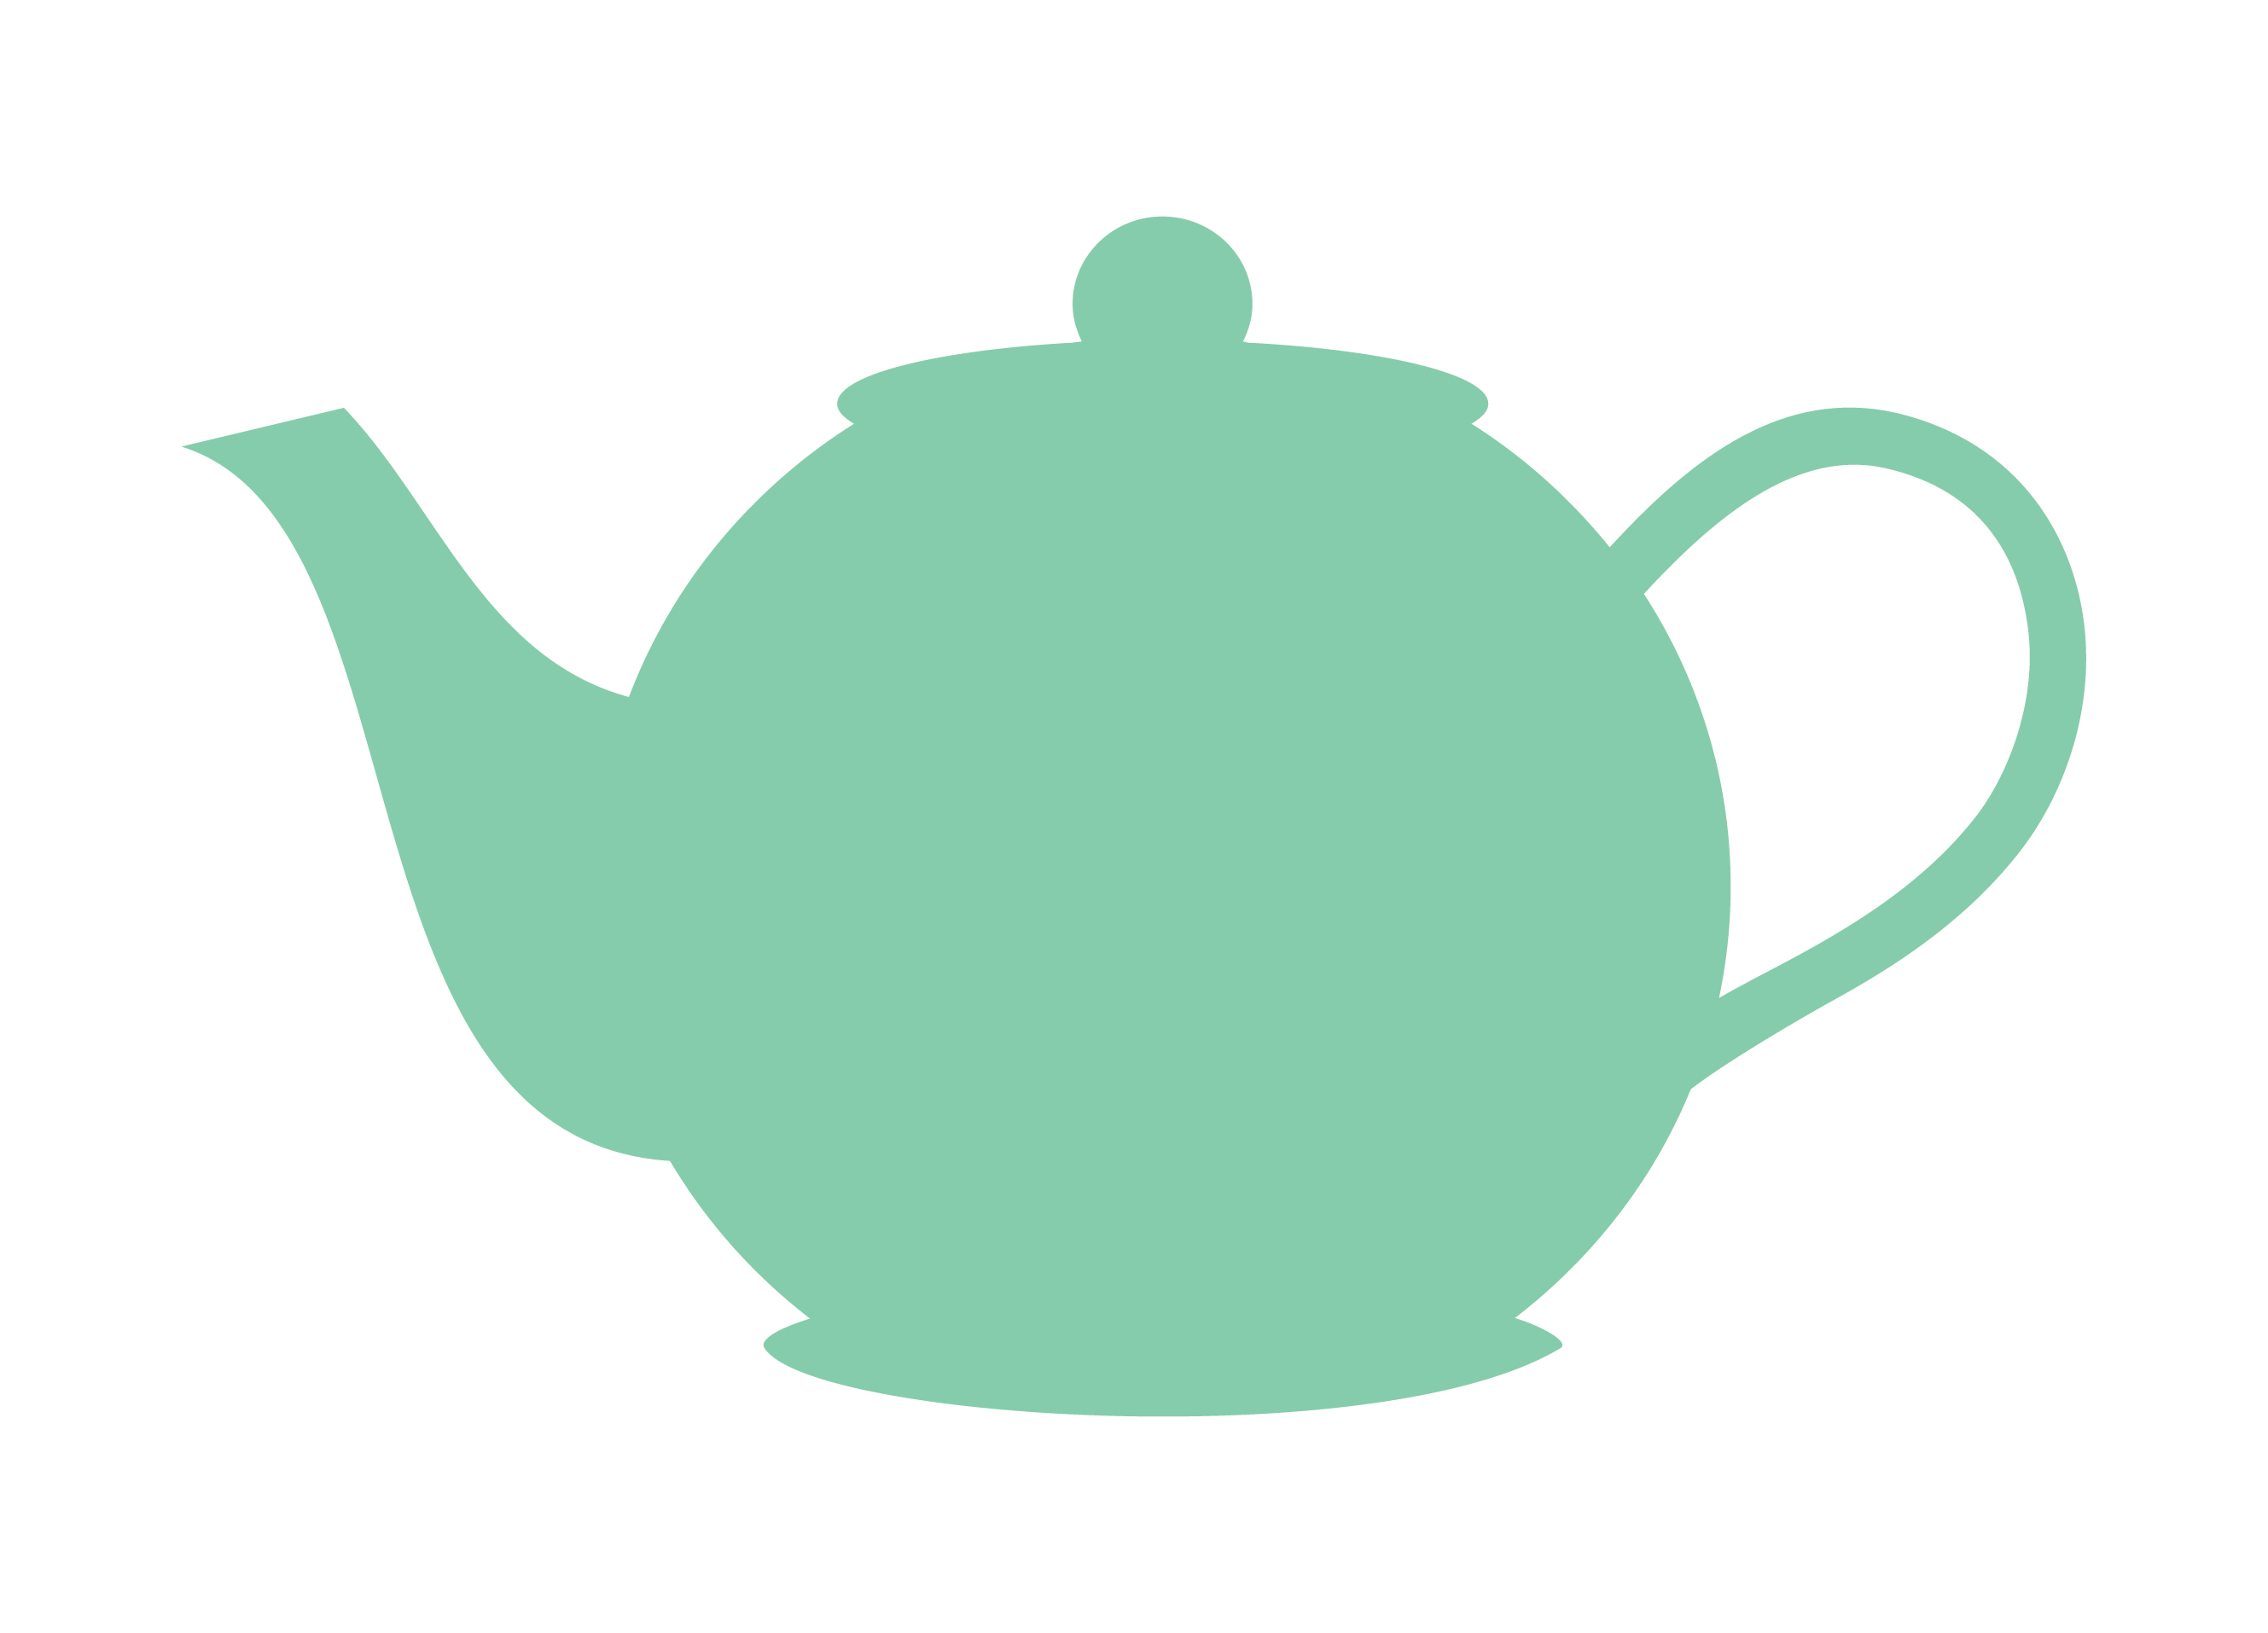 Teacup teapot clipart black and white free clipart images 2 image #25315